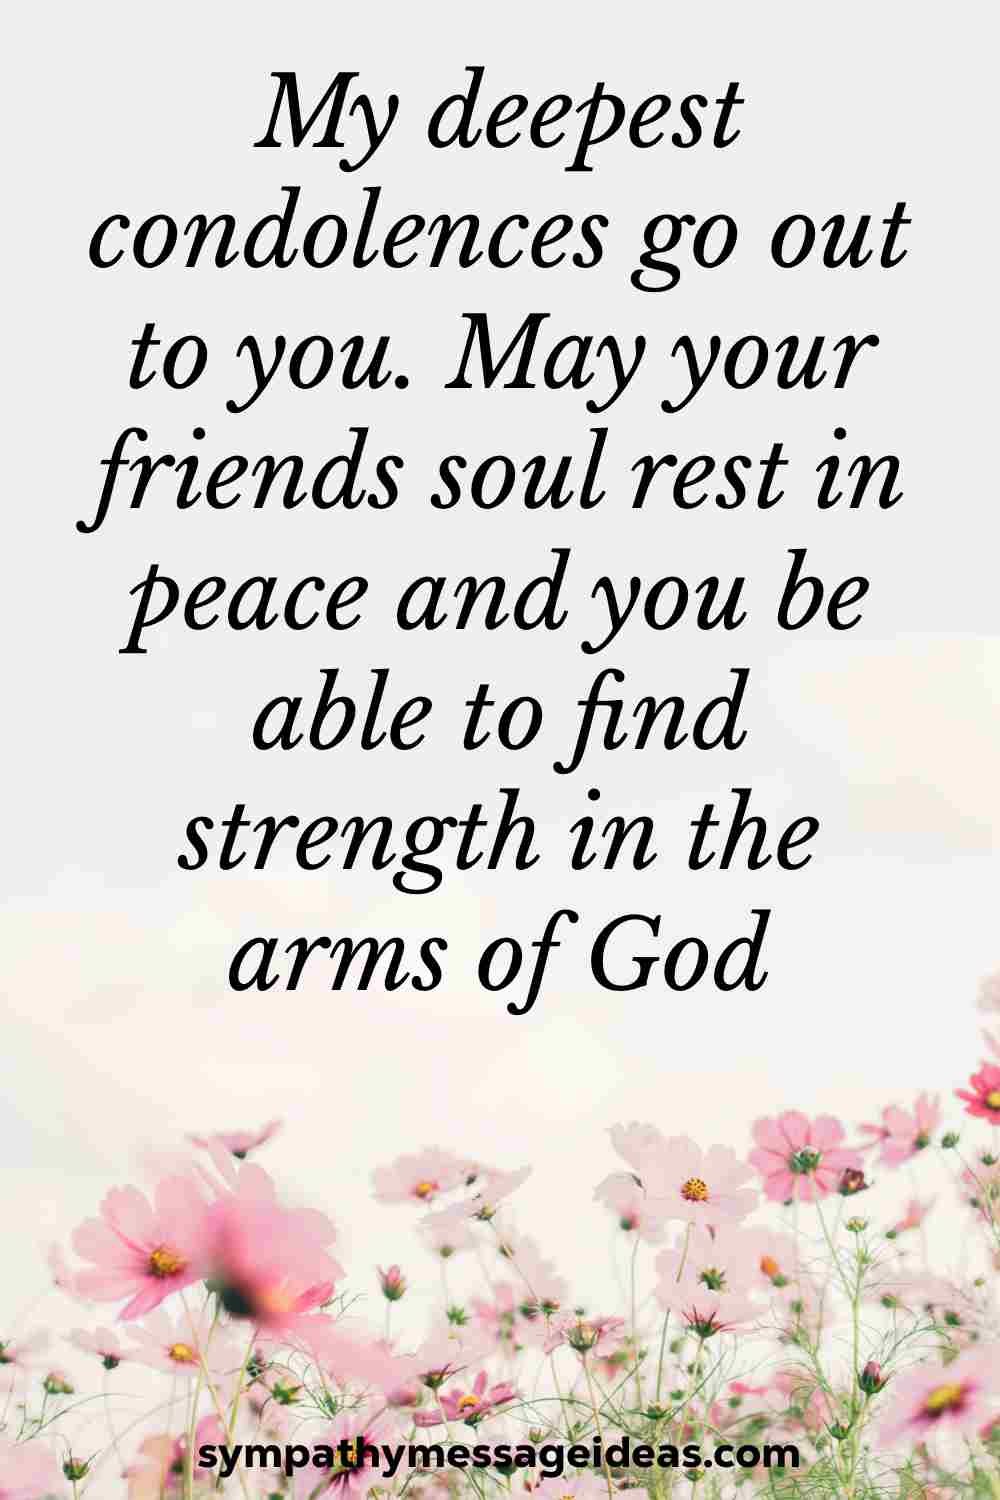 Comforting Christian Condolences Messages And Quotes For The Bereaved